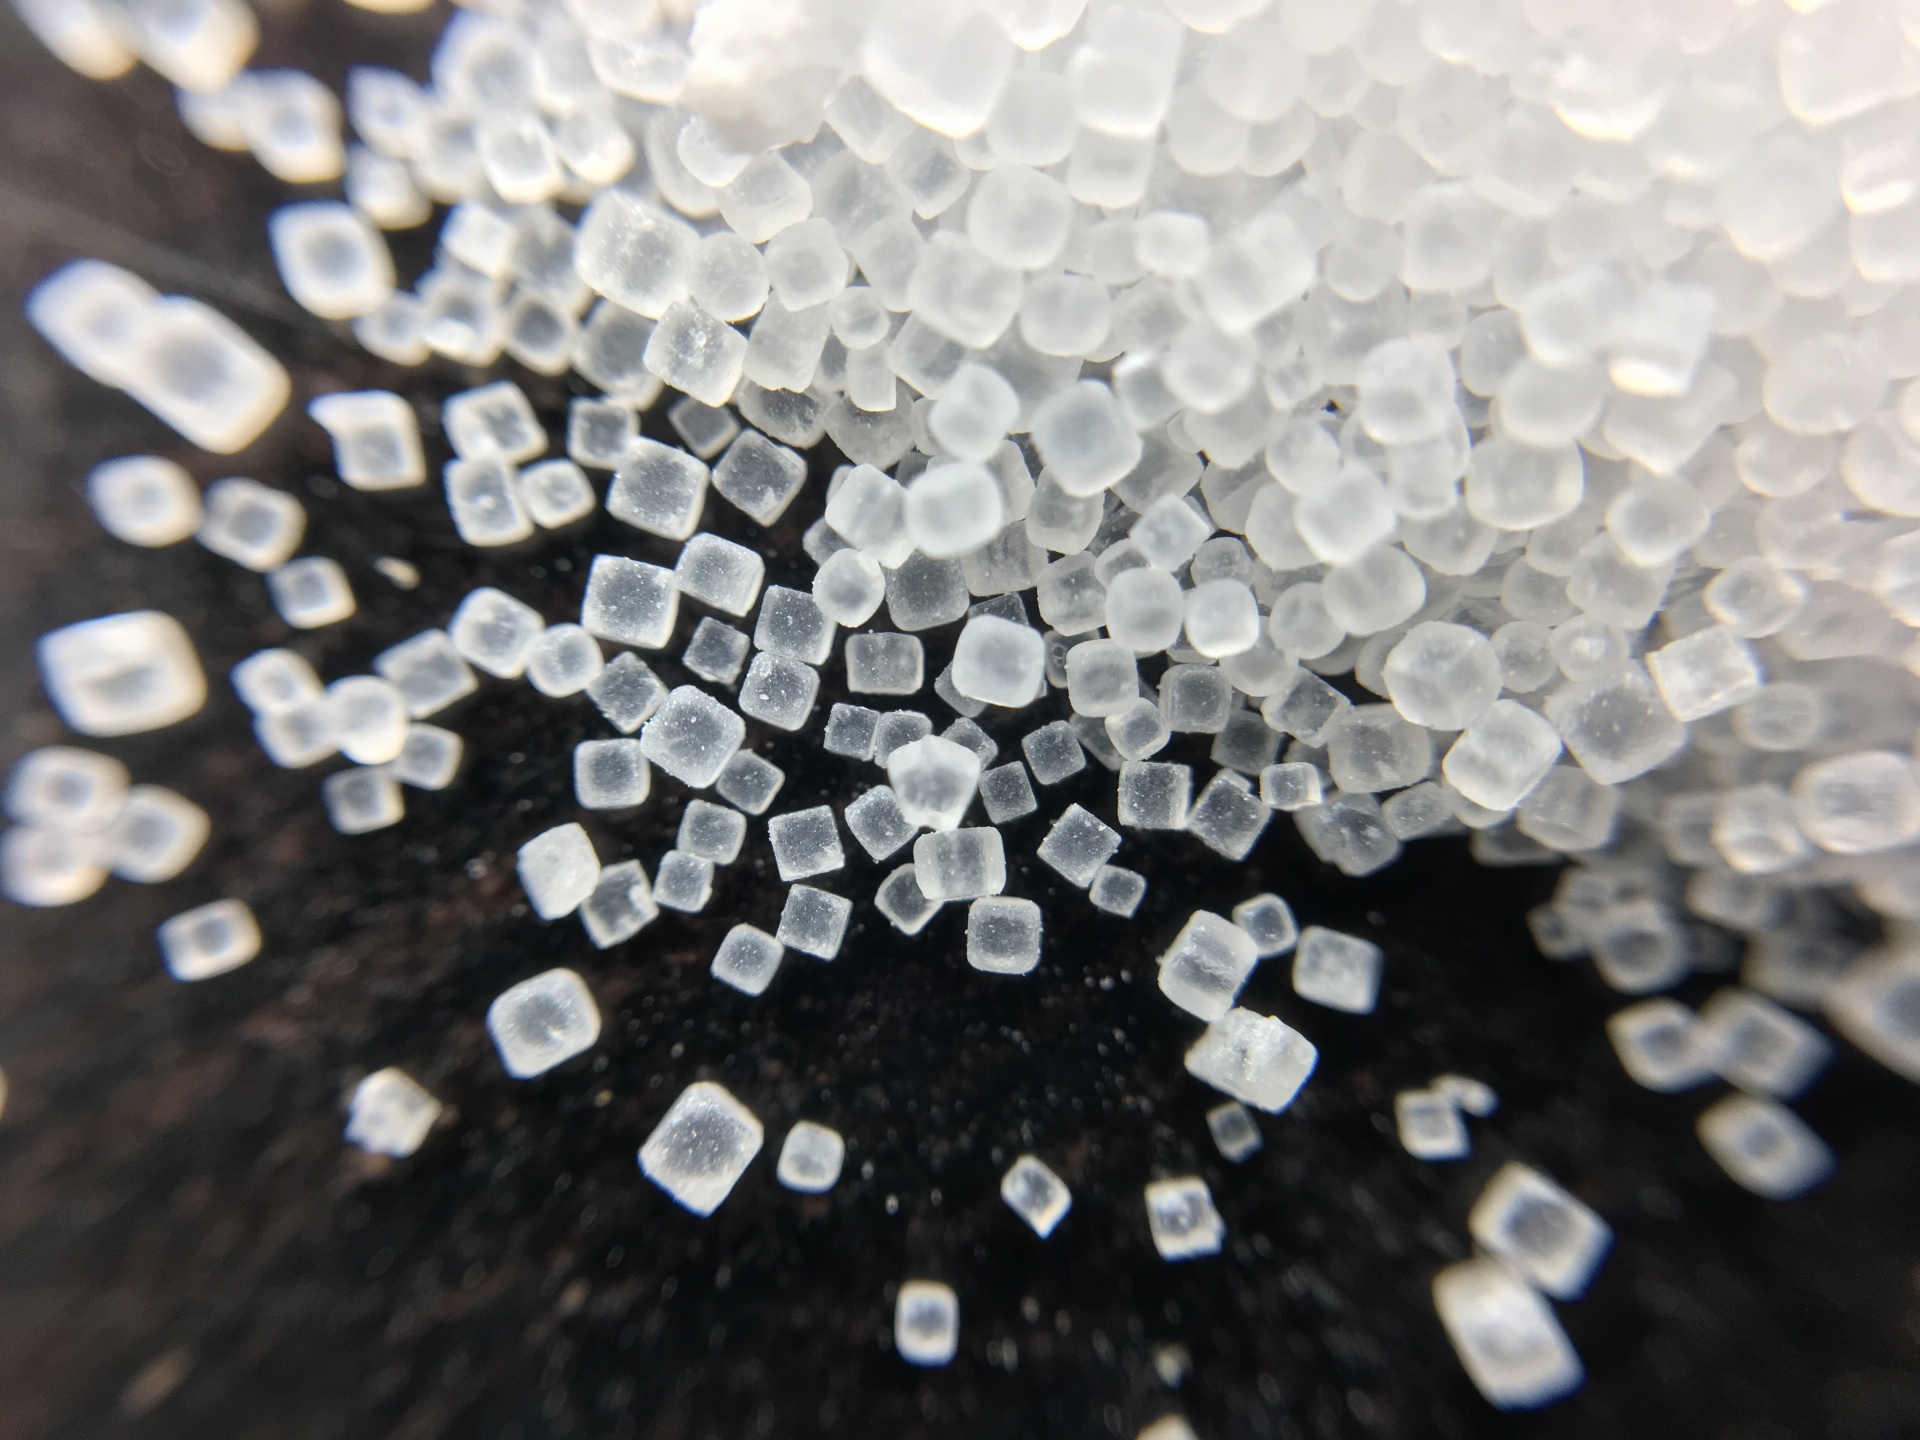 Iodized salt forms crystals that are perfect cubes. Very cool to see at magnification